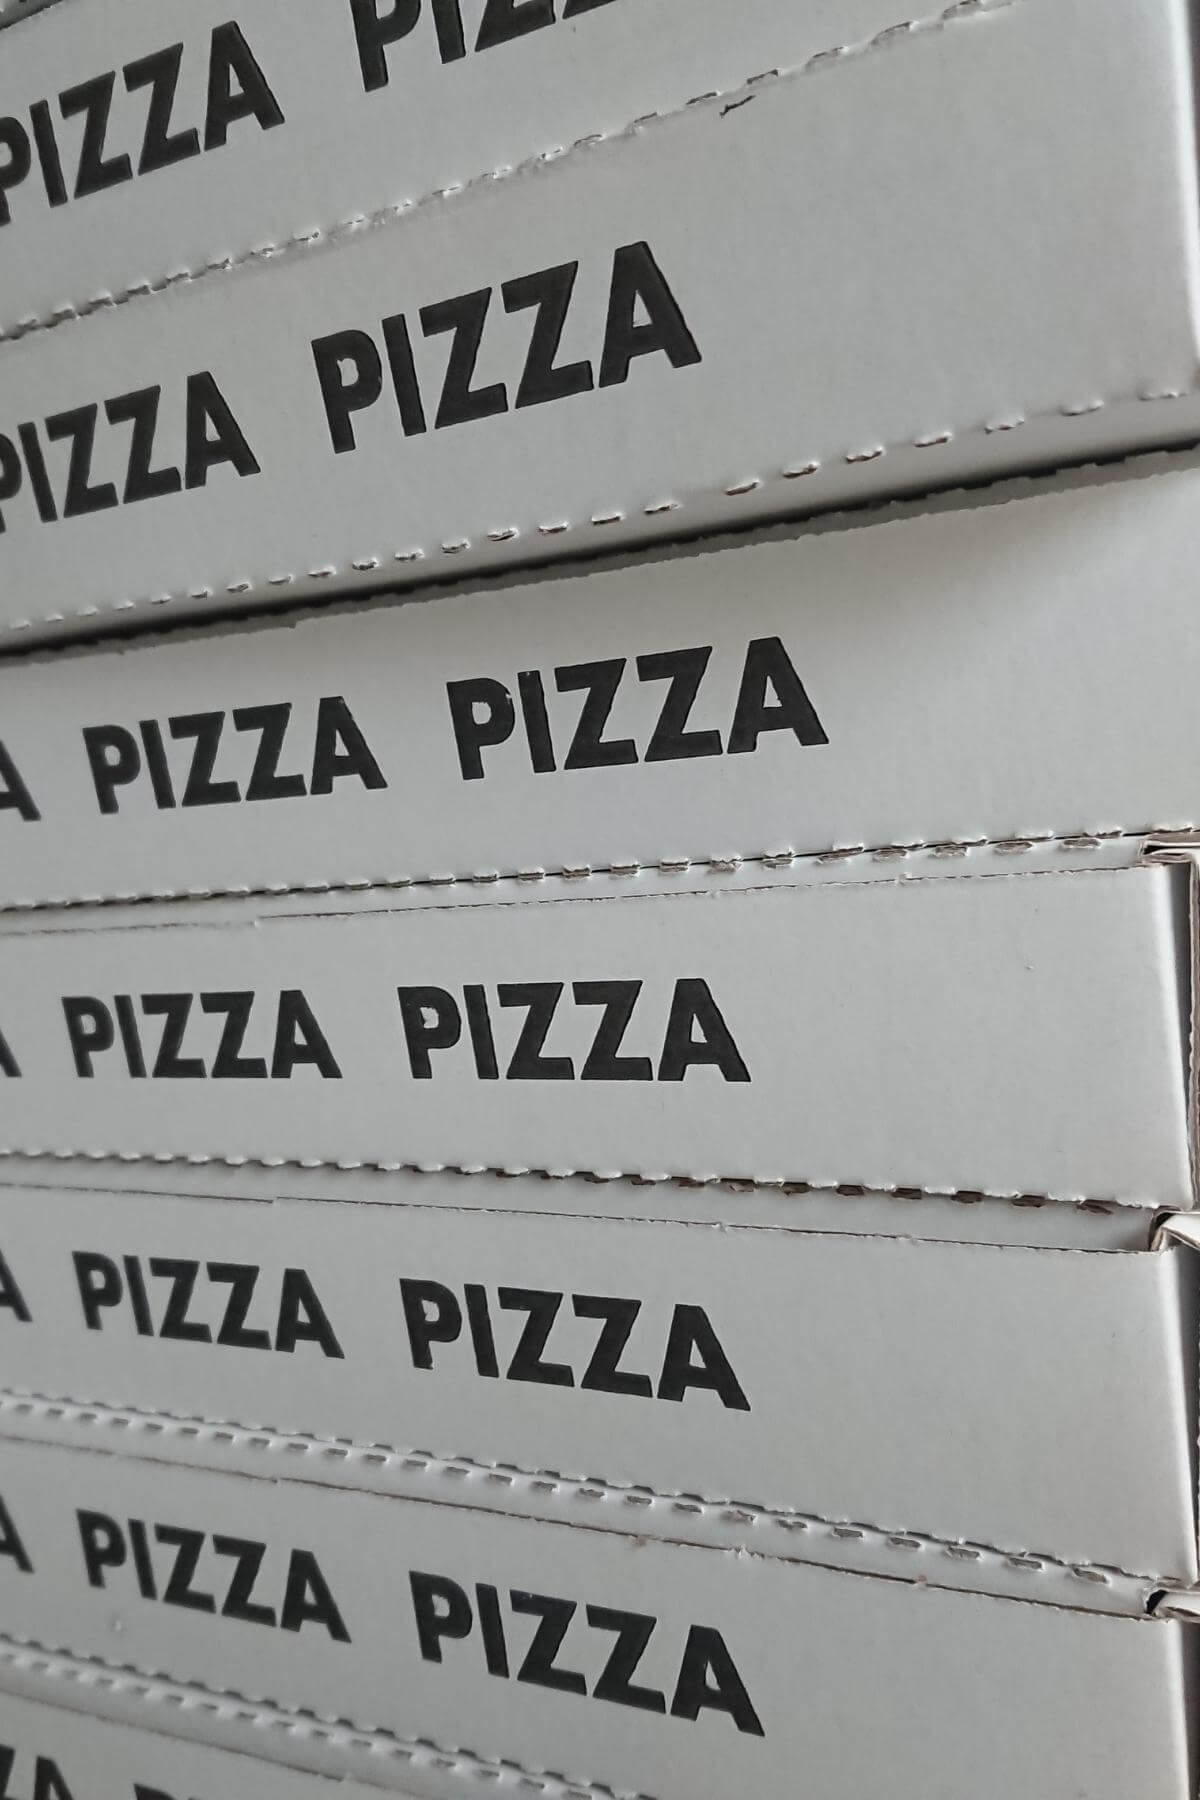 Pizza boxes stacked up.